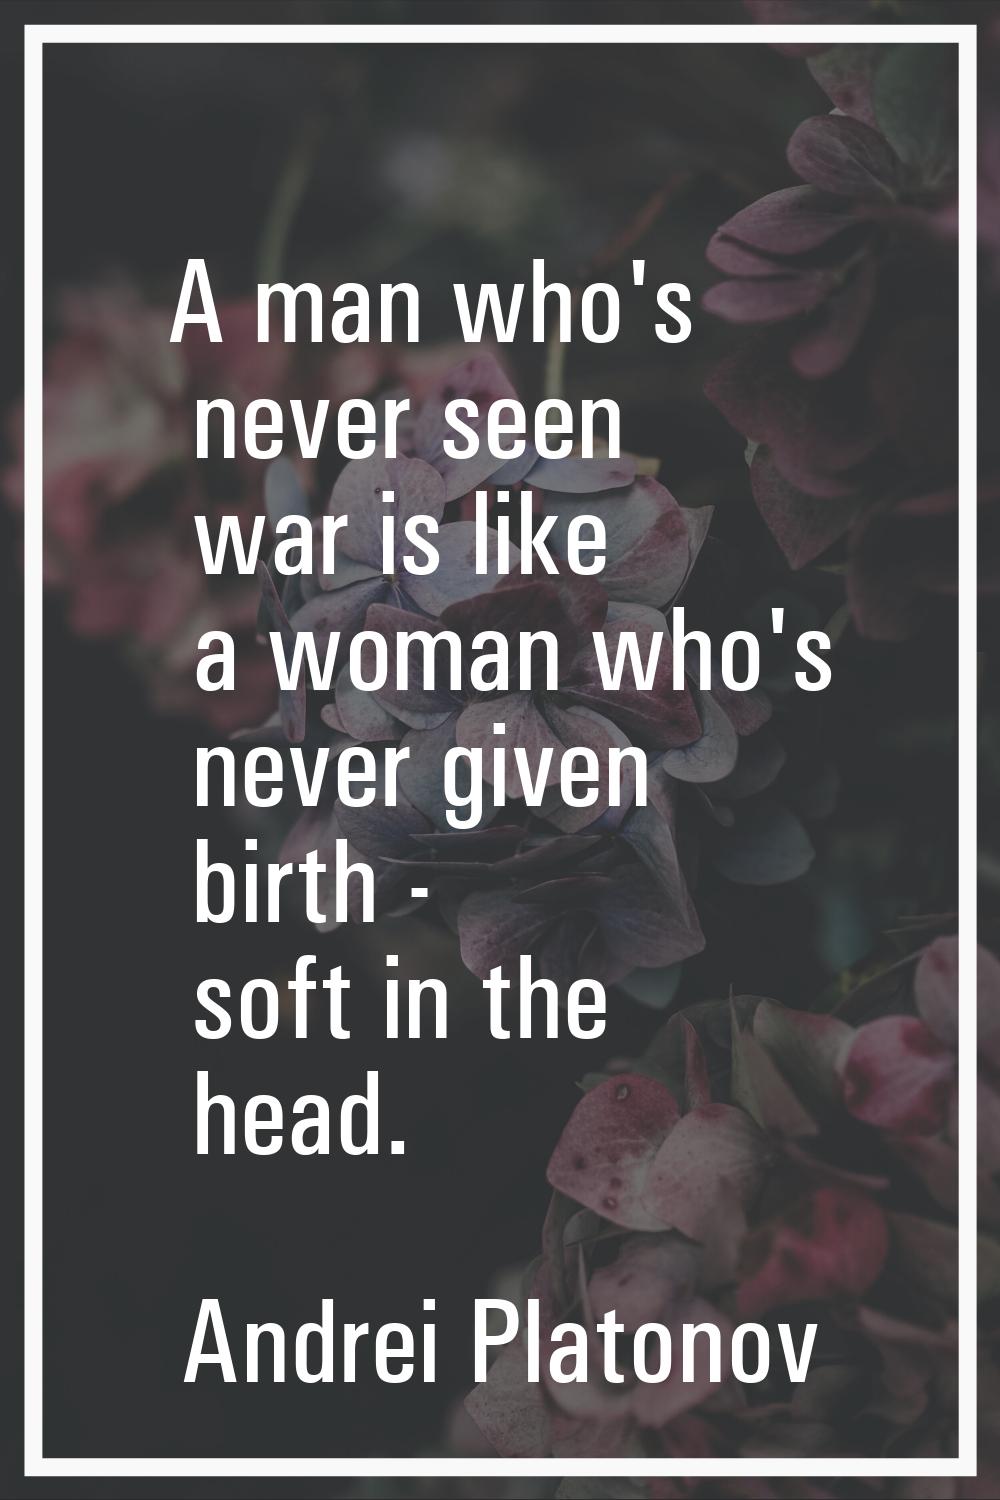 A man who's never seen war is like a woman who's never given birth - soft in the head.